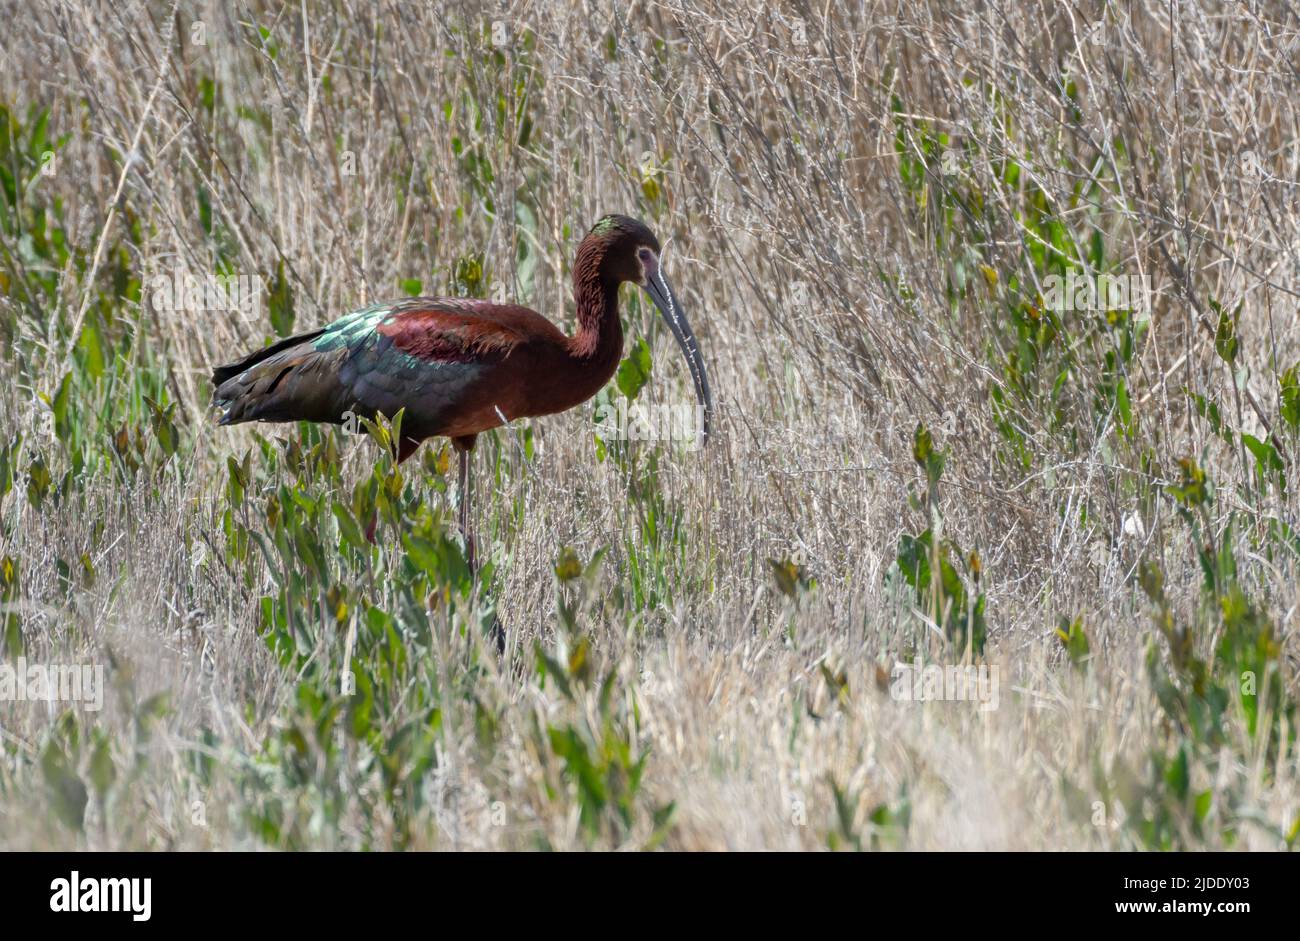 Colorful and shiny, White-faced Ibis, Plegadis chihi, foraging in a field of tall grass and shrubs. Bird in wild. Stock Photo